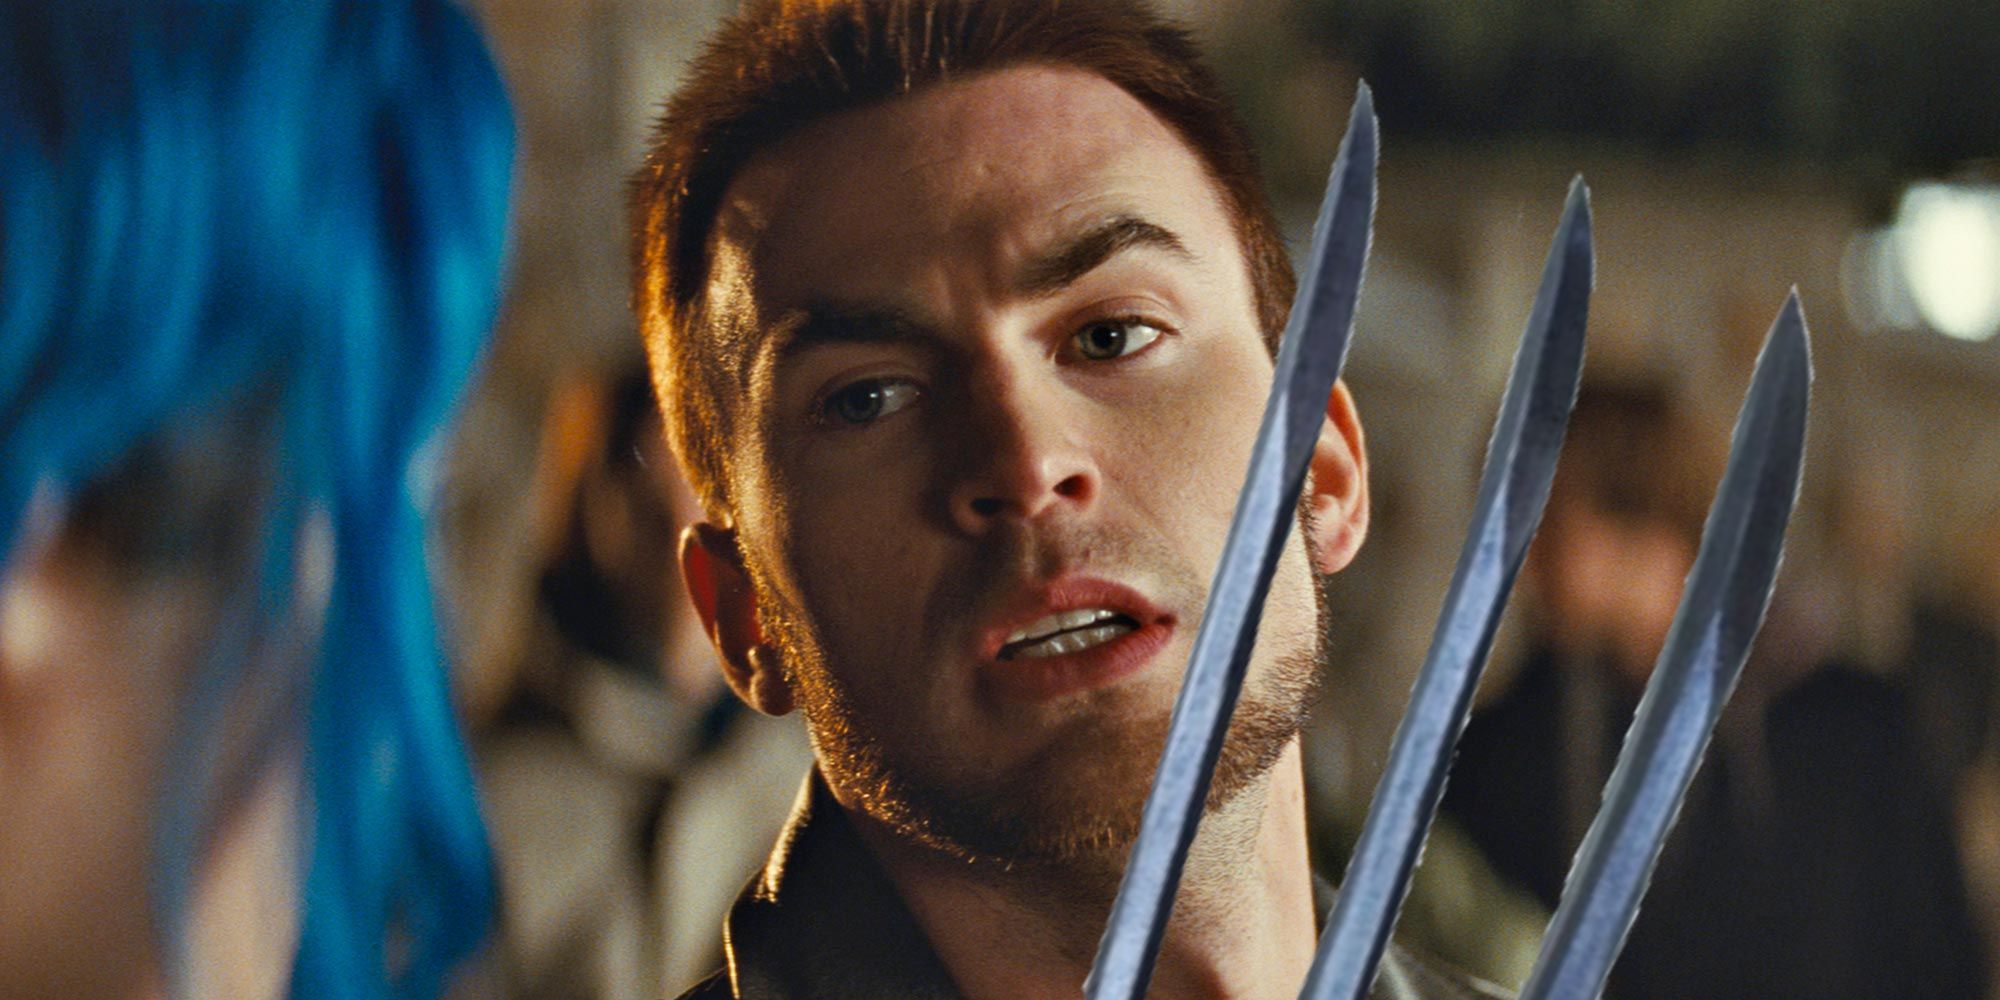 Chris Evans from Scott Pilgrim vs. the World with wolverine metal claws